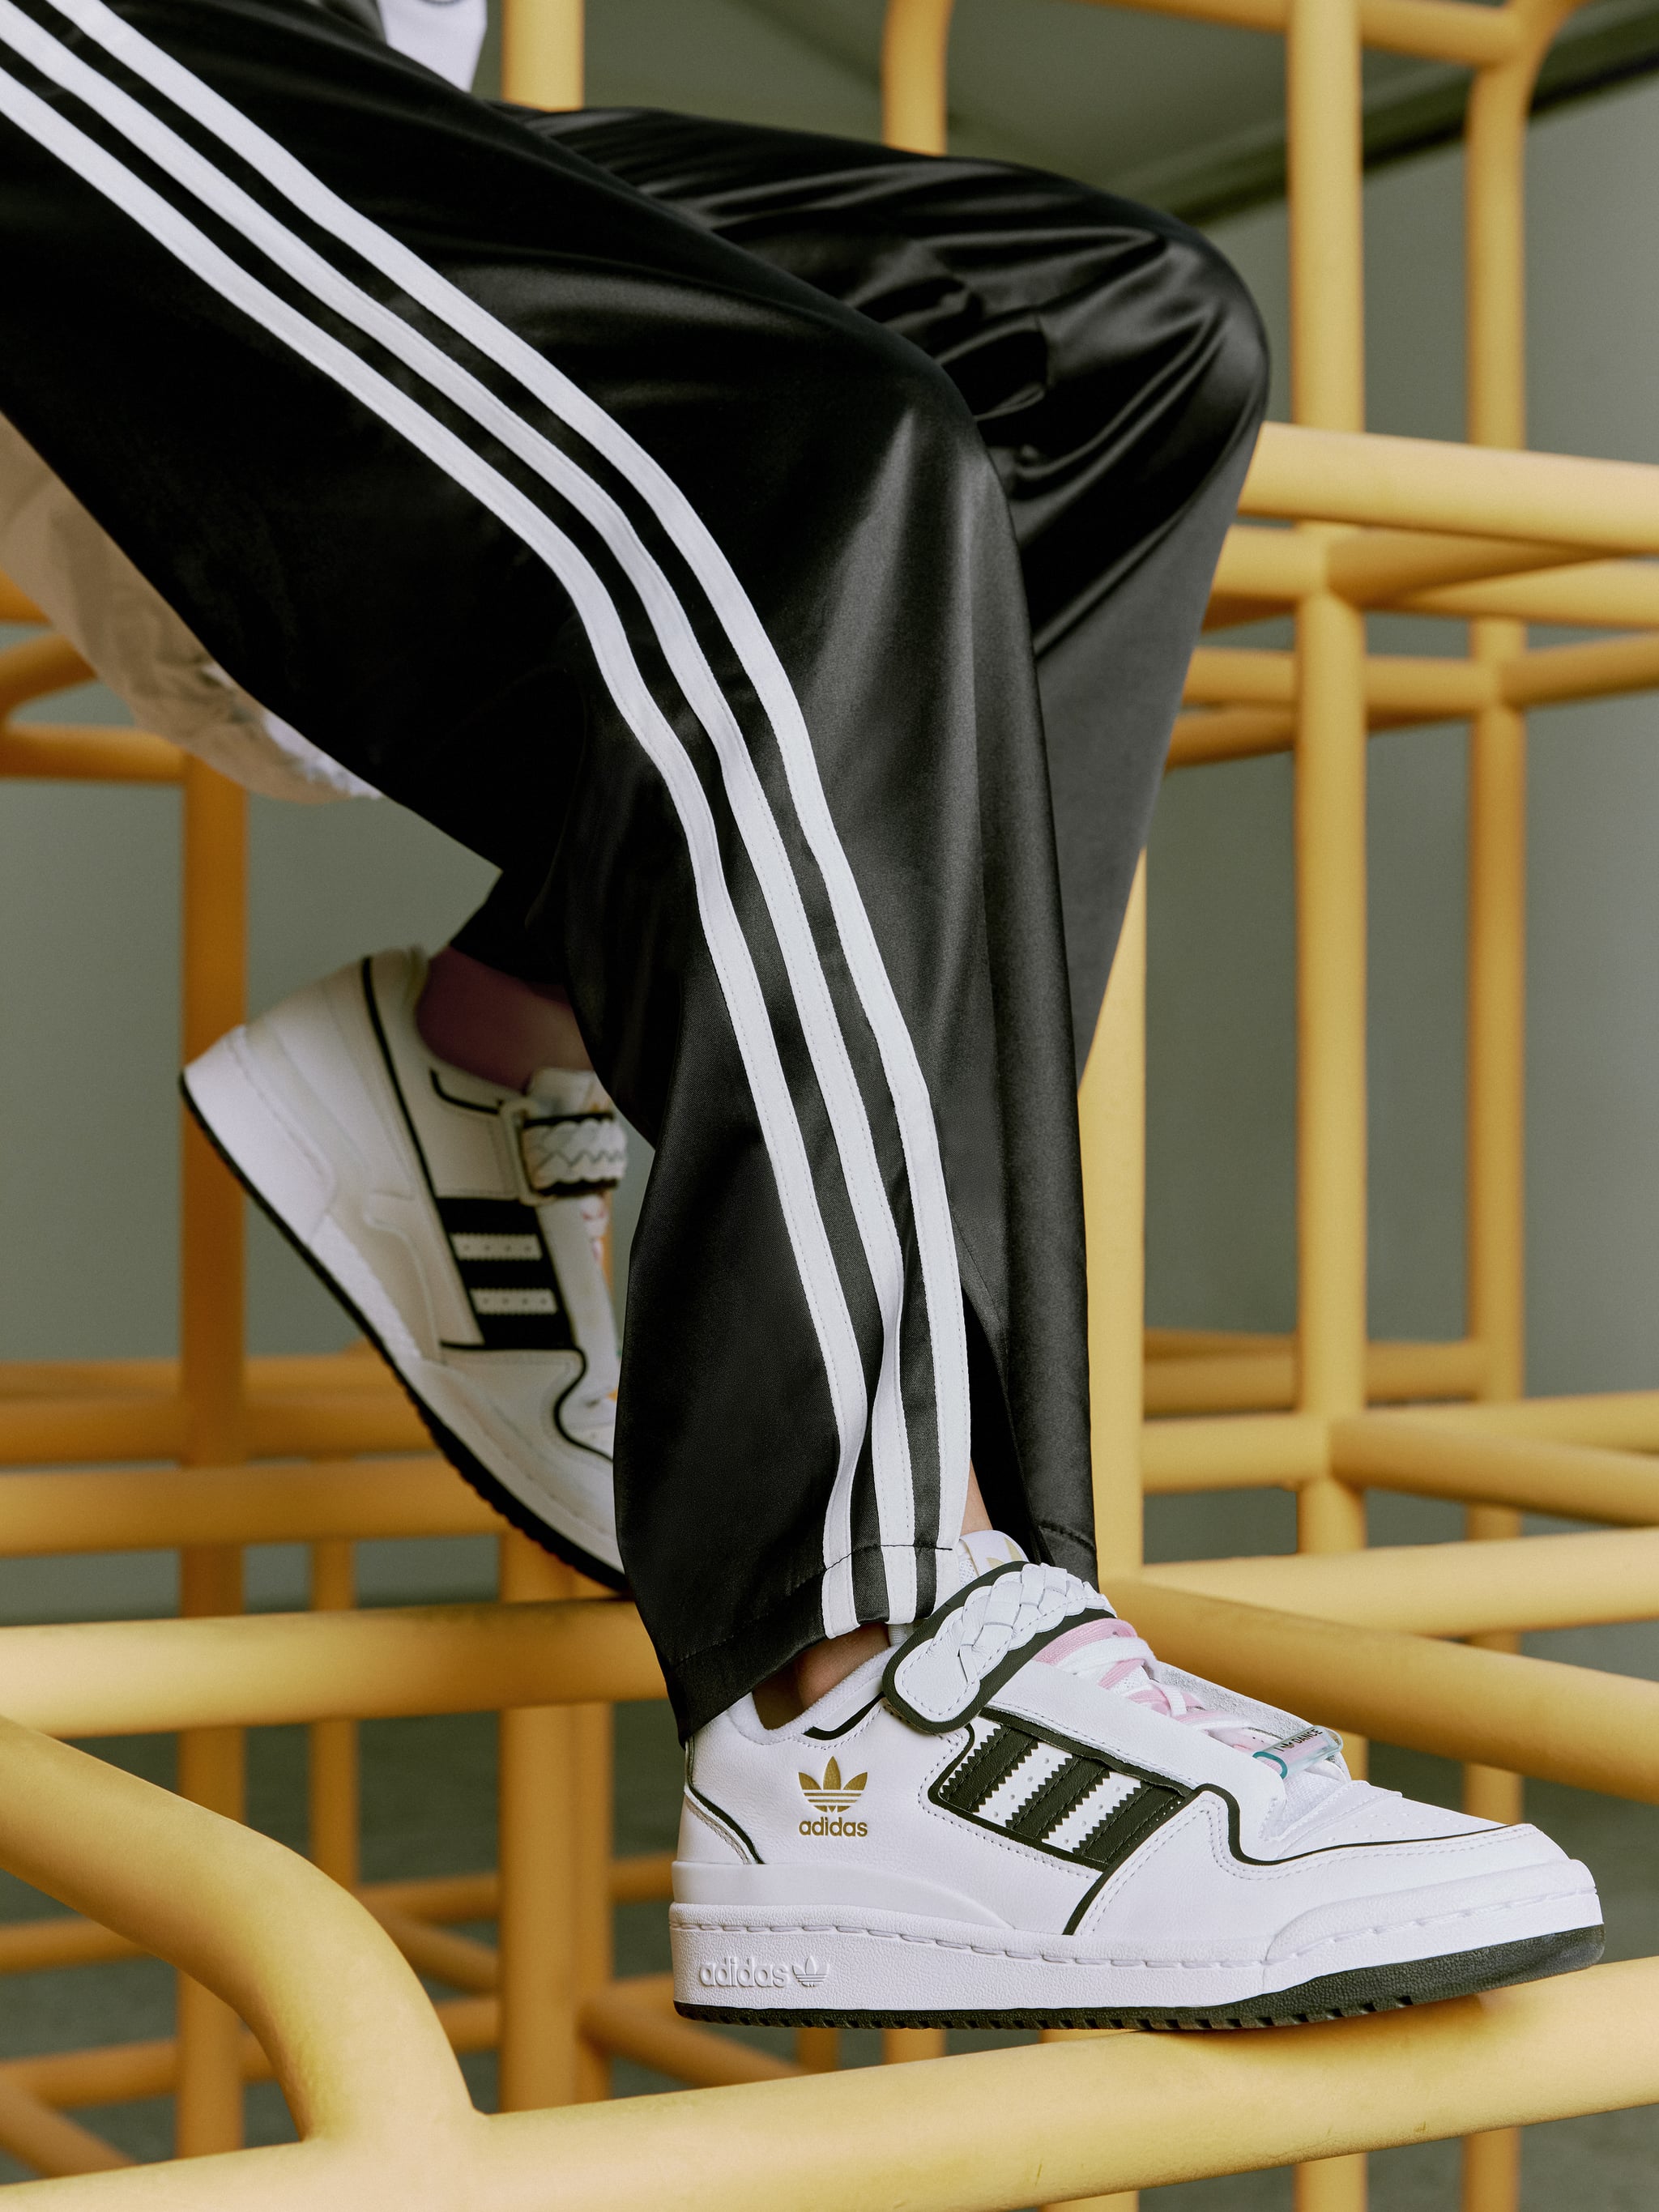 Buy > new arrival adidas shoes 2021 > in stock